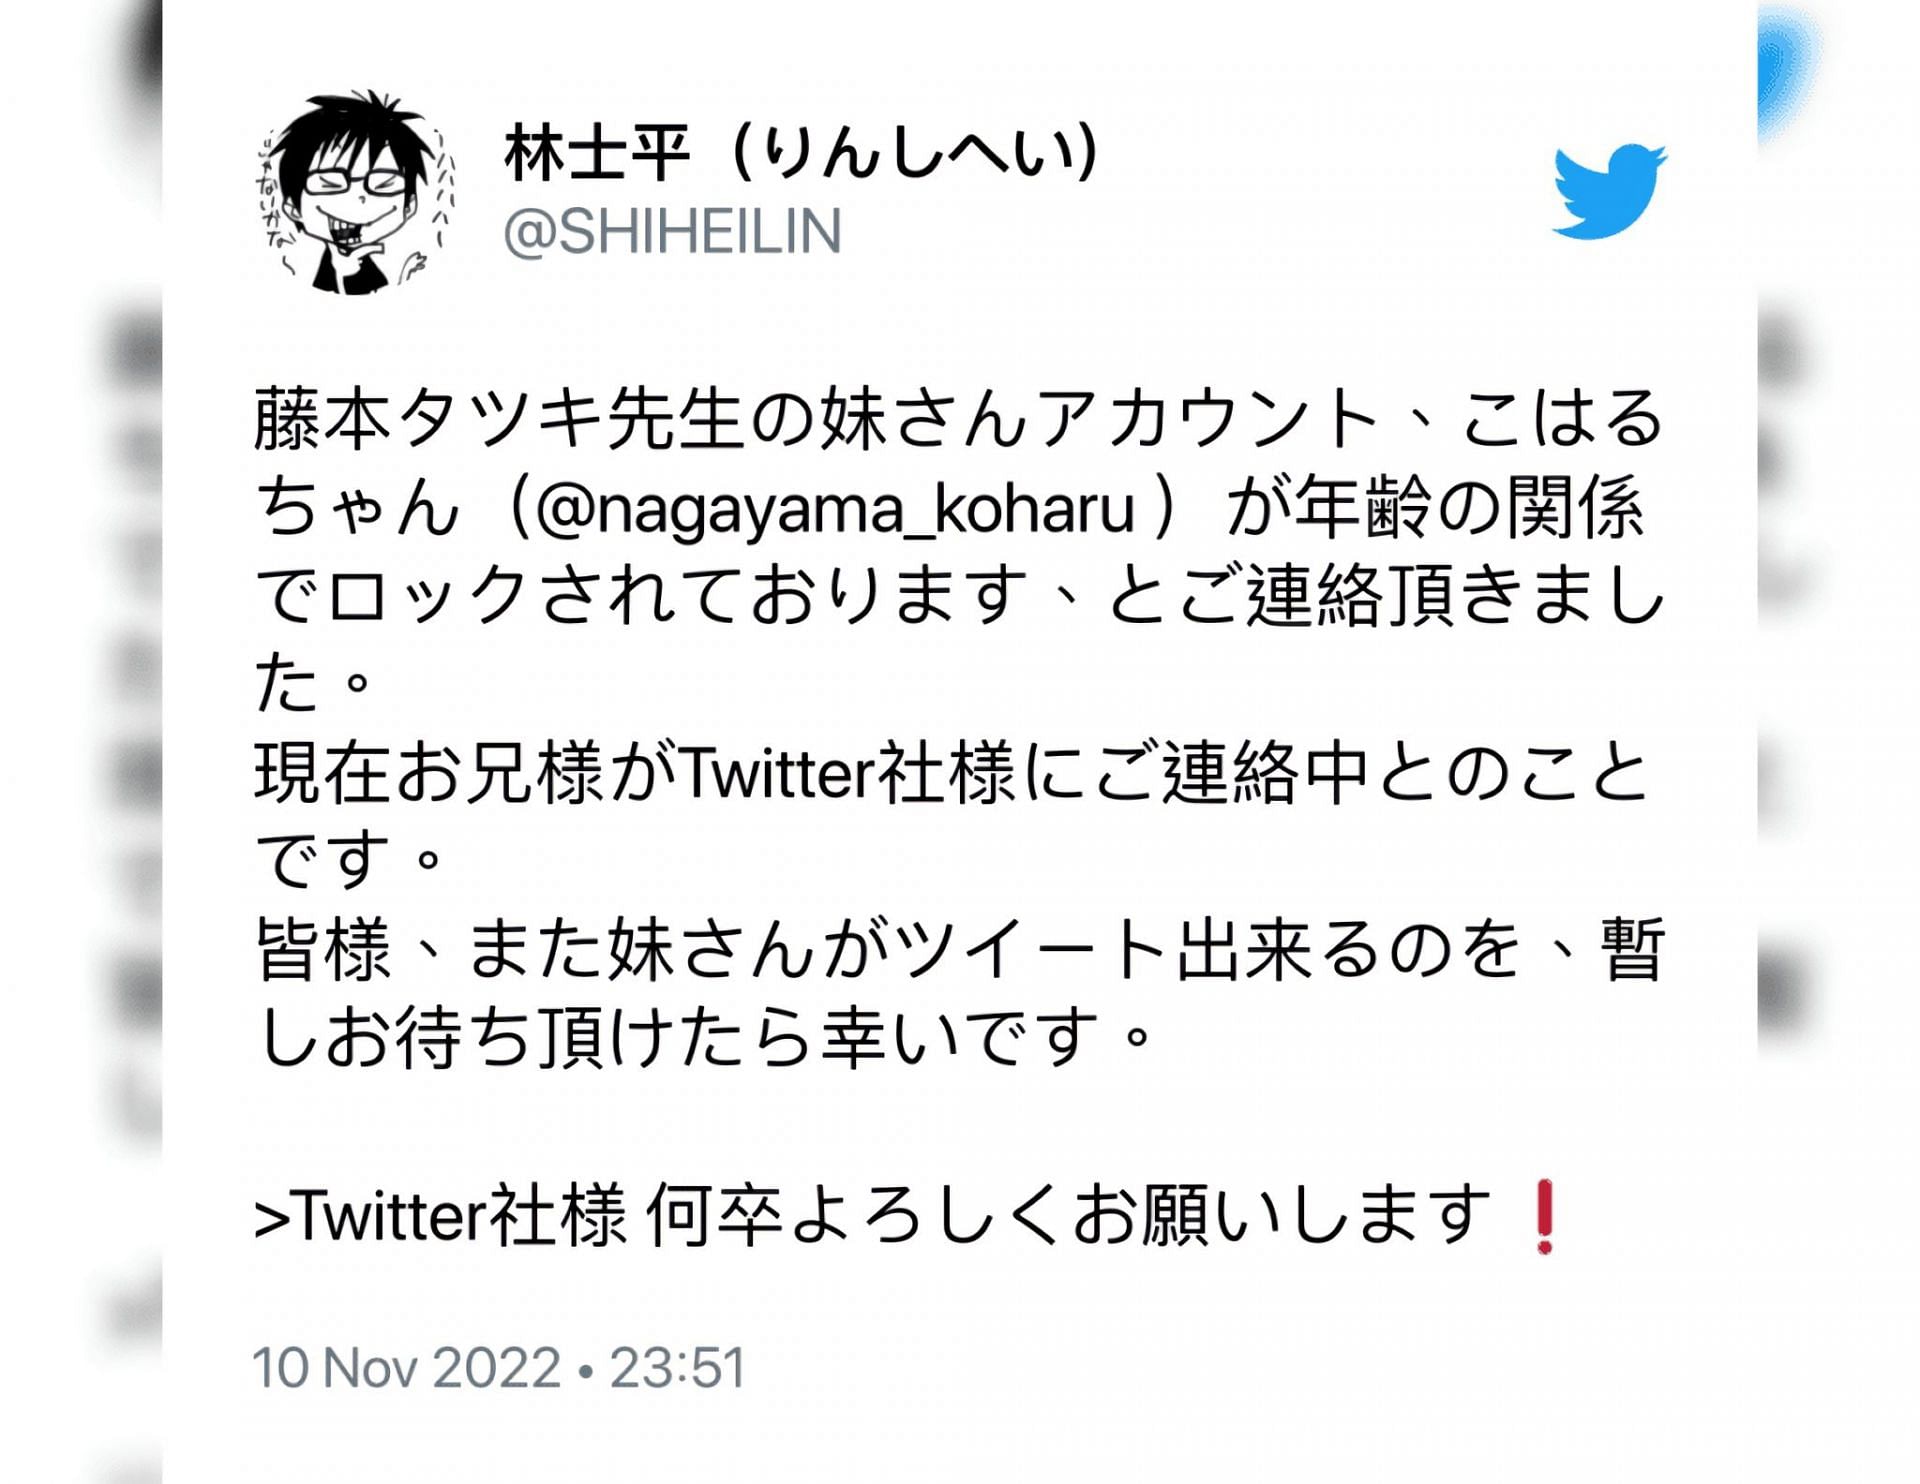 The tweet posted by the Chainsaw Man editor Shihei Lin